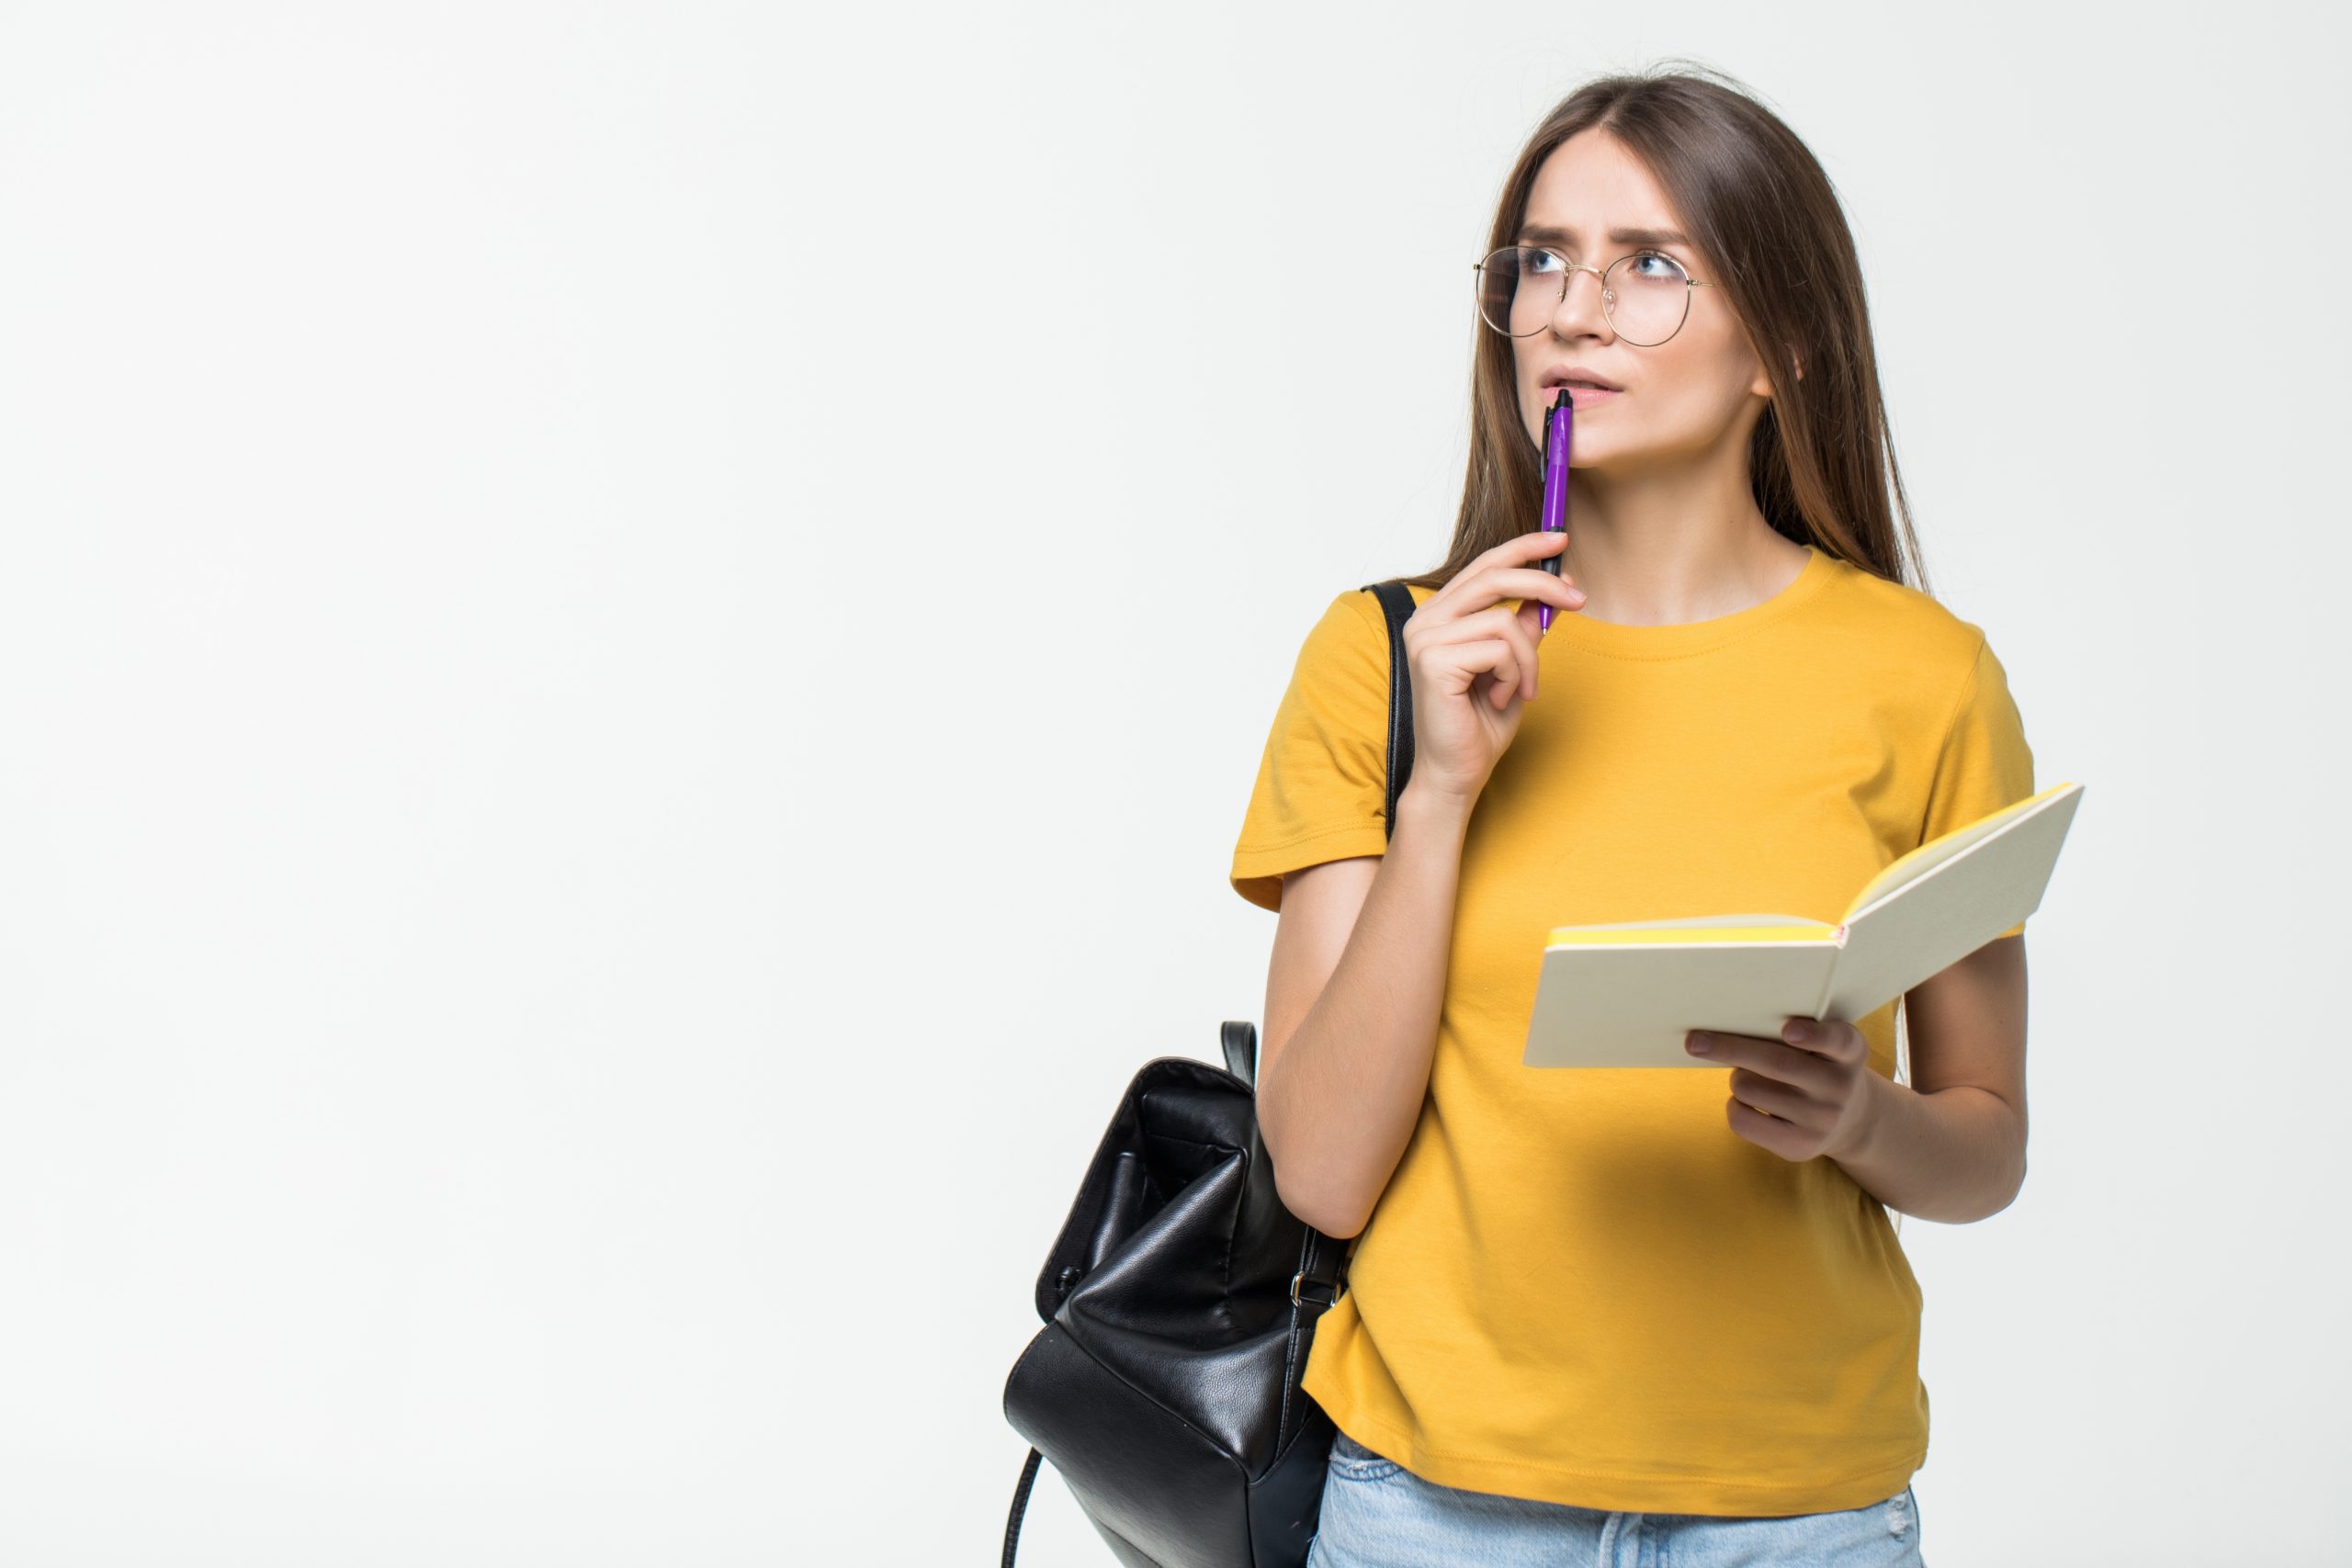 portrait-of-a-smiling-casual-girl-student-with-backpack-writing-in-a-notepad-while-standing-with-books-isolated-over-white-background